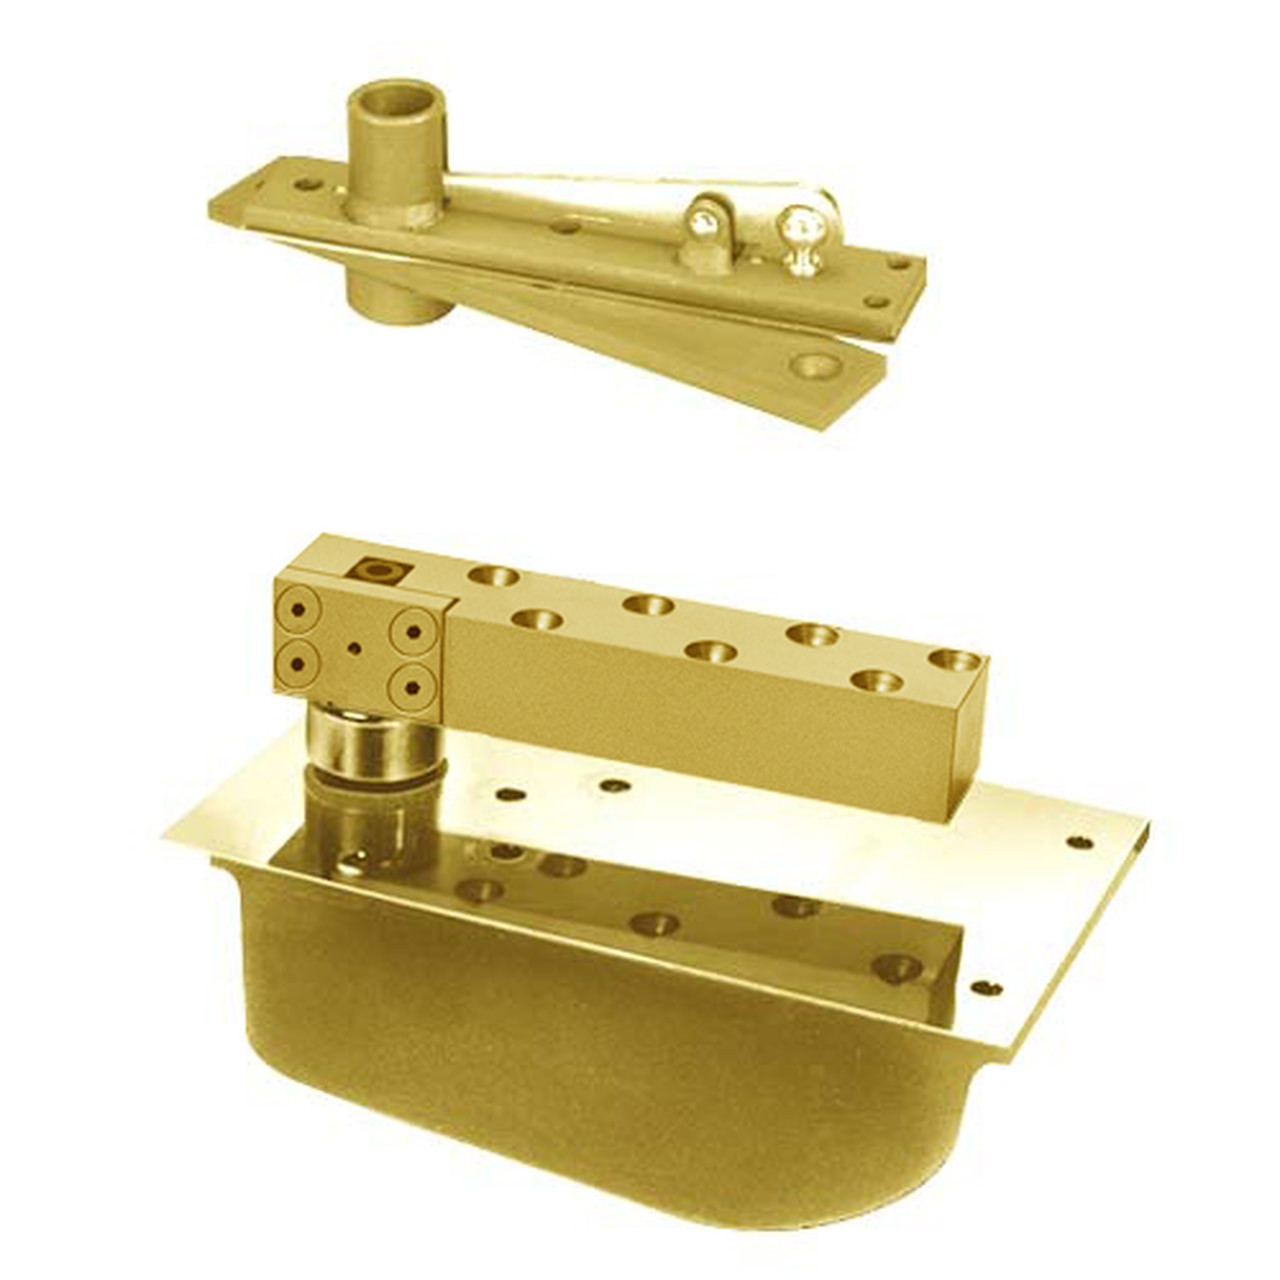 H28-85N-587-LFP-LCC-RH-605 Rixson 28 Series Extra Heavy Duty Single Acting Center Hung Concealed Floor Closer in Bright Brass Finish